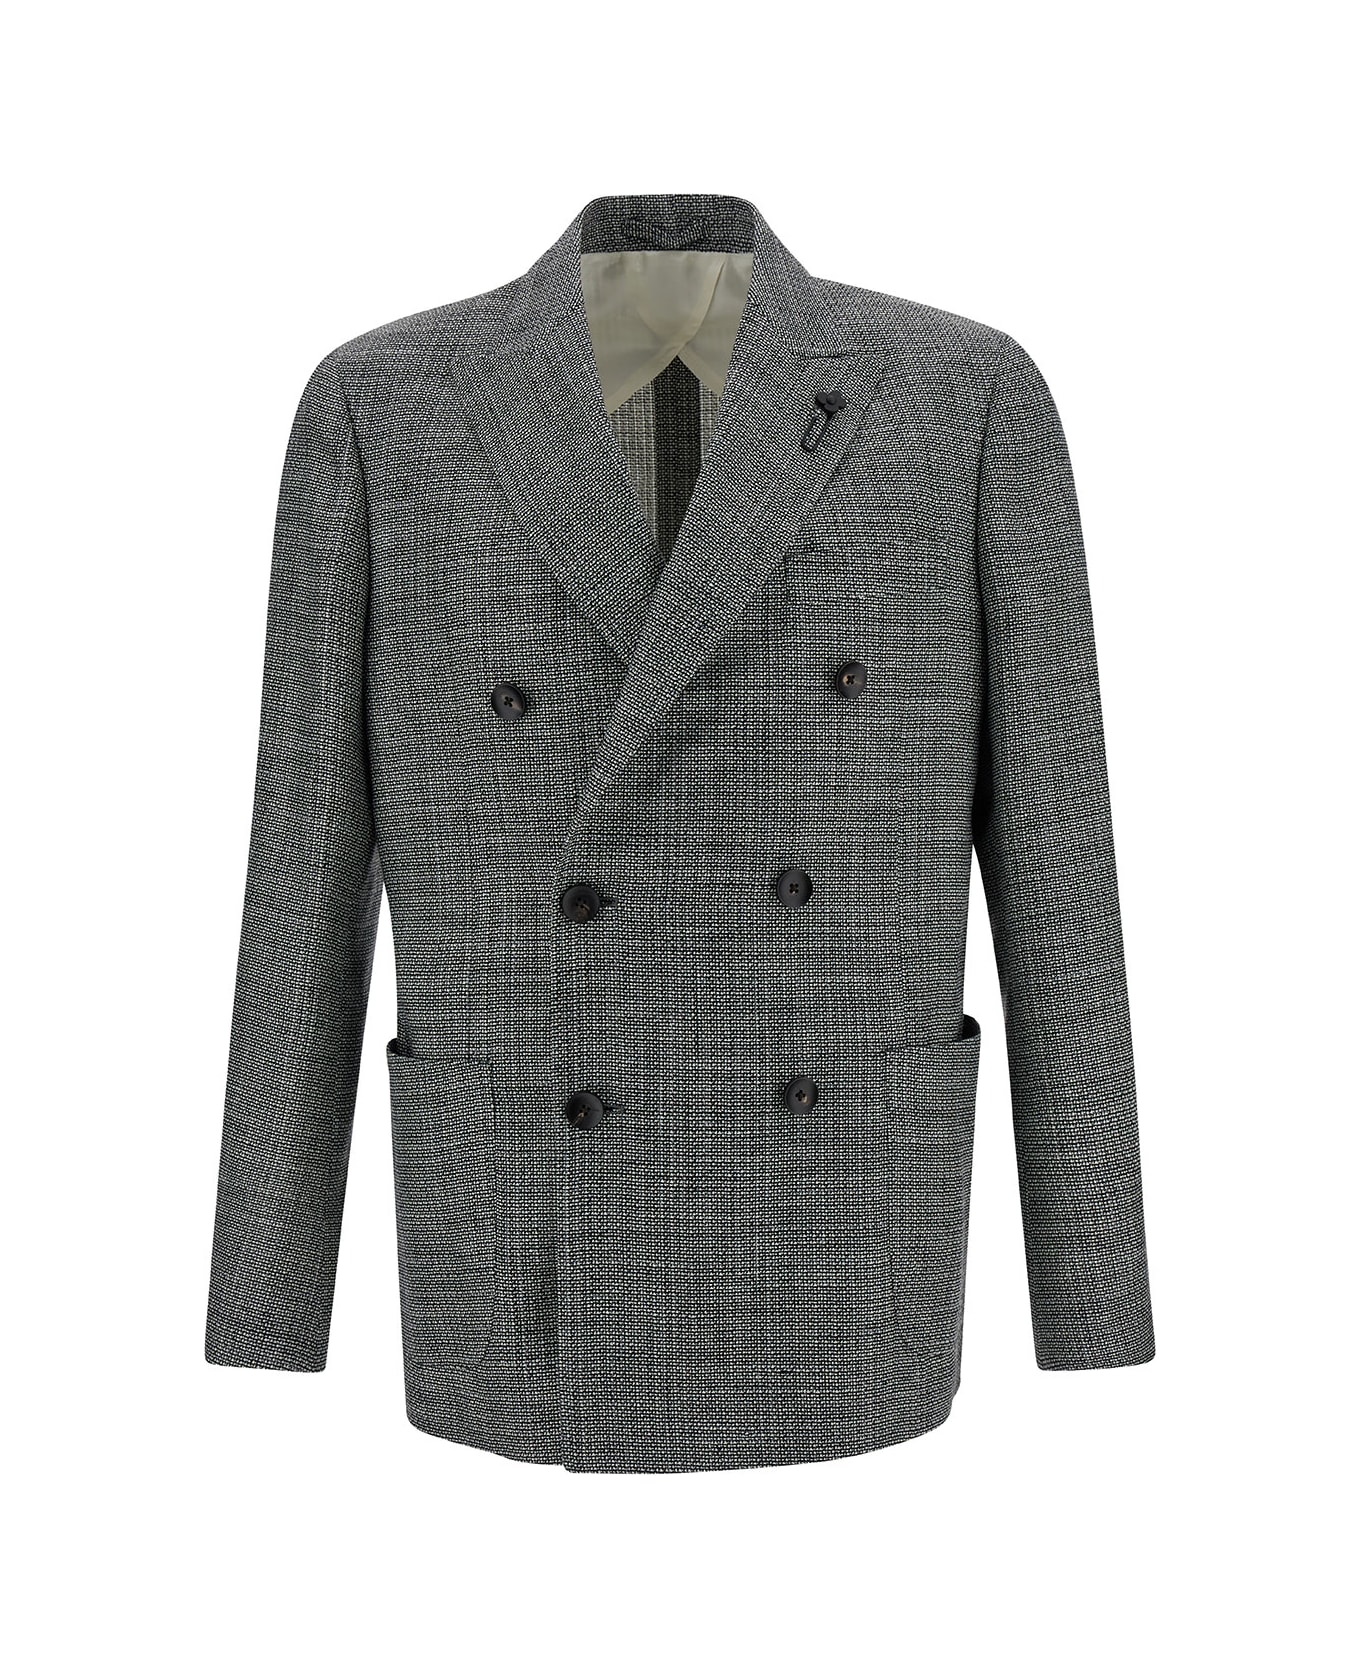 Lardini Grey Double-breasted Blazer With Buttons In Wool Blend Man - White/black コート